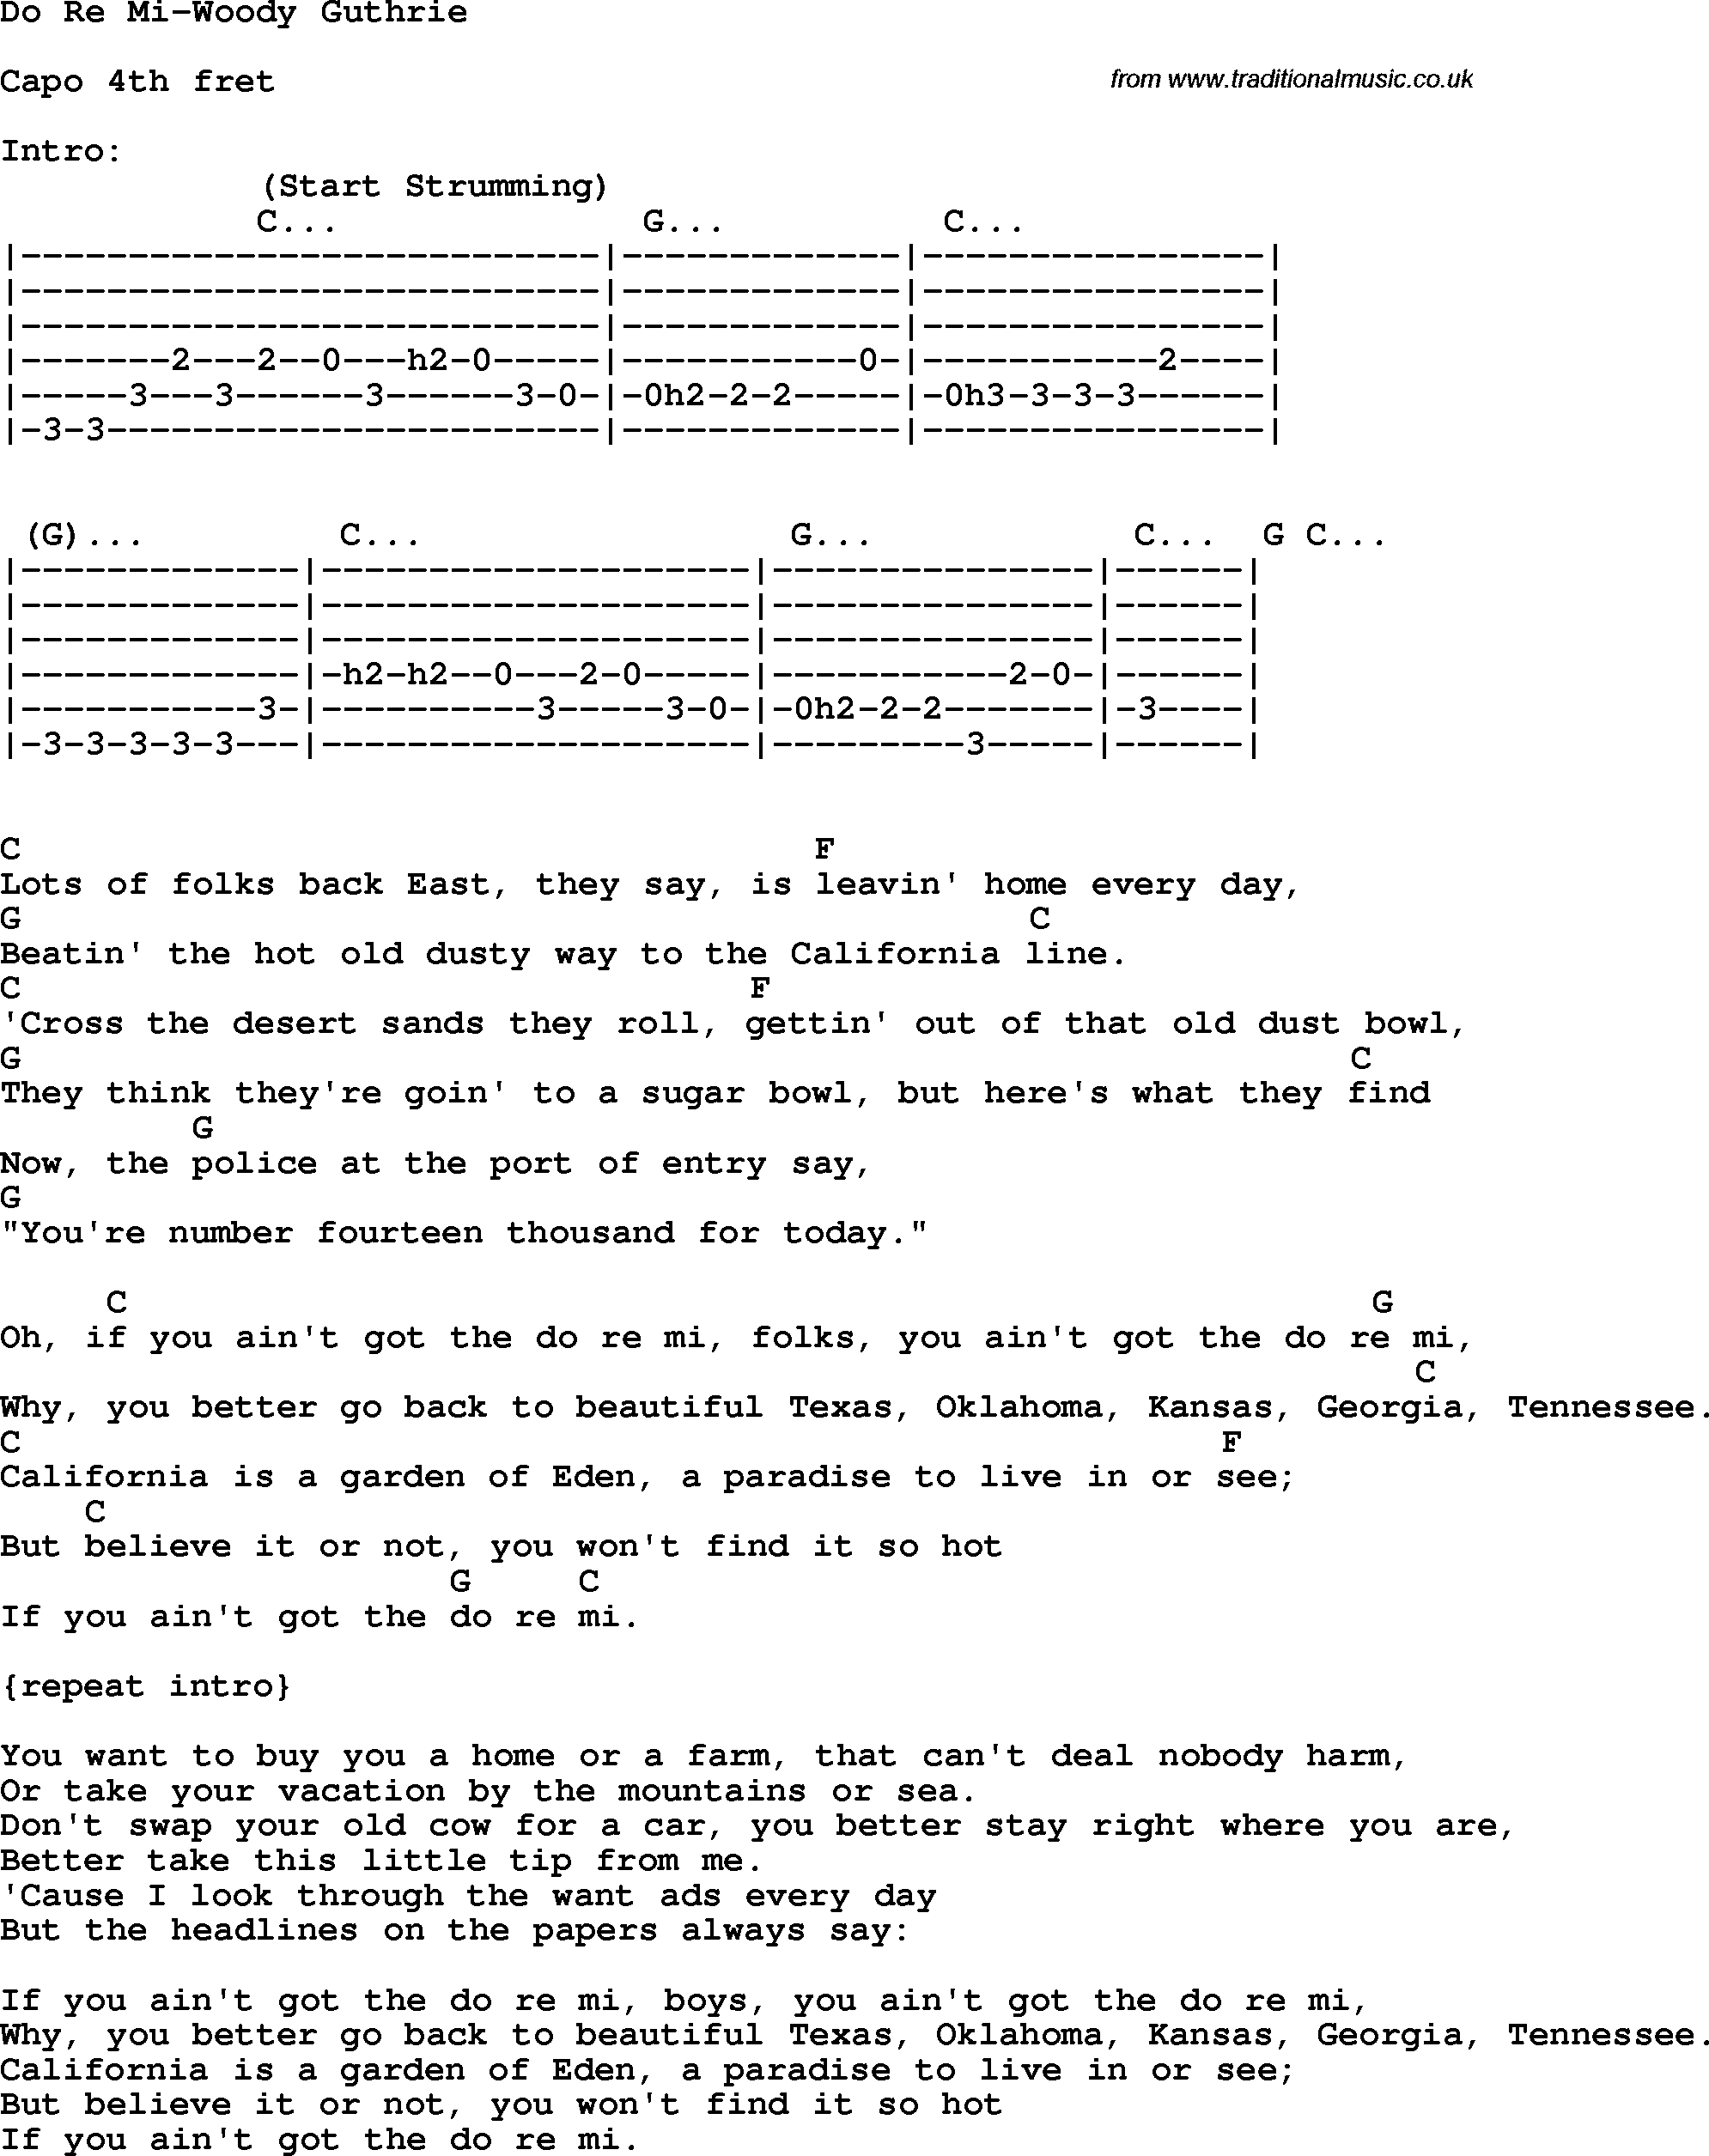 Protest Song Do Re Mi-Woody Guthrie lyrics and chords